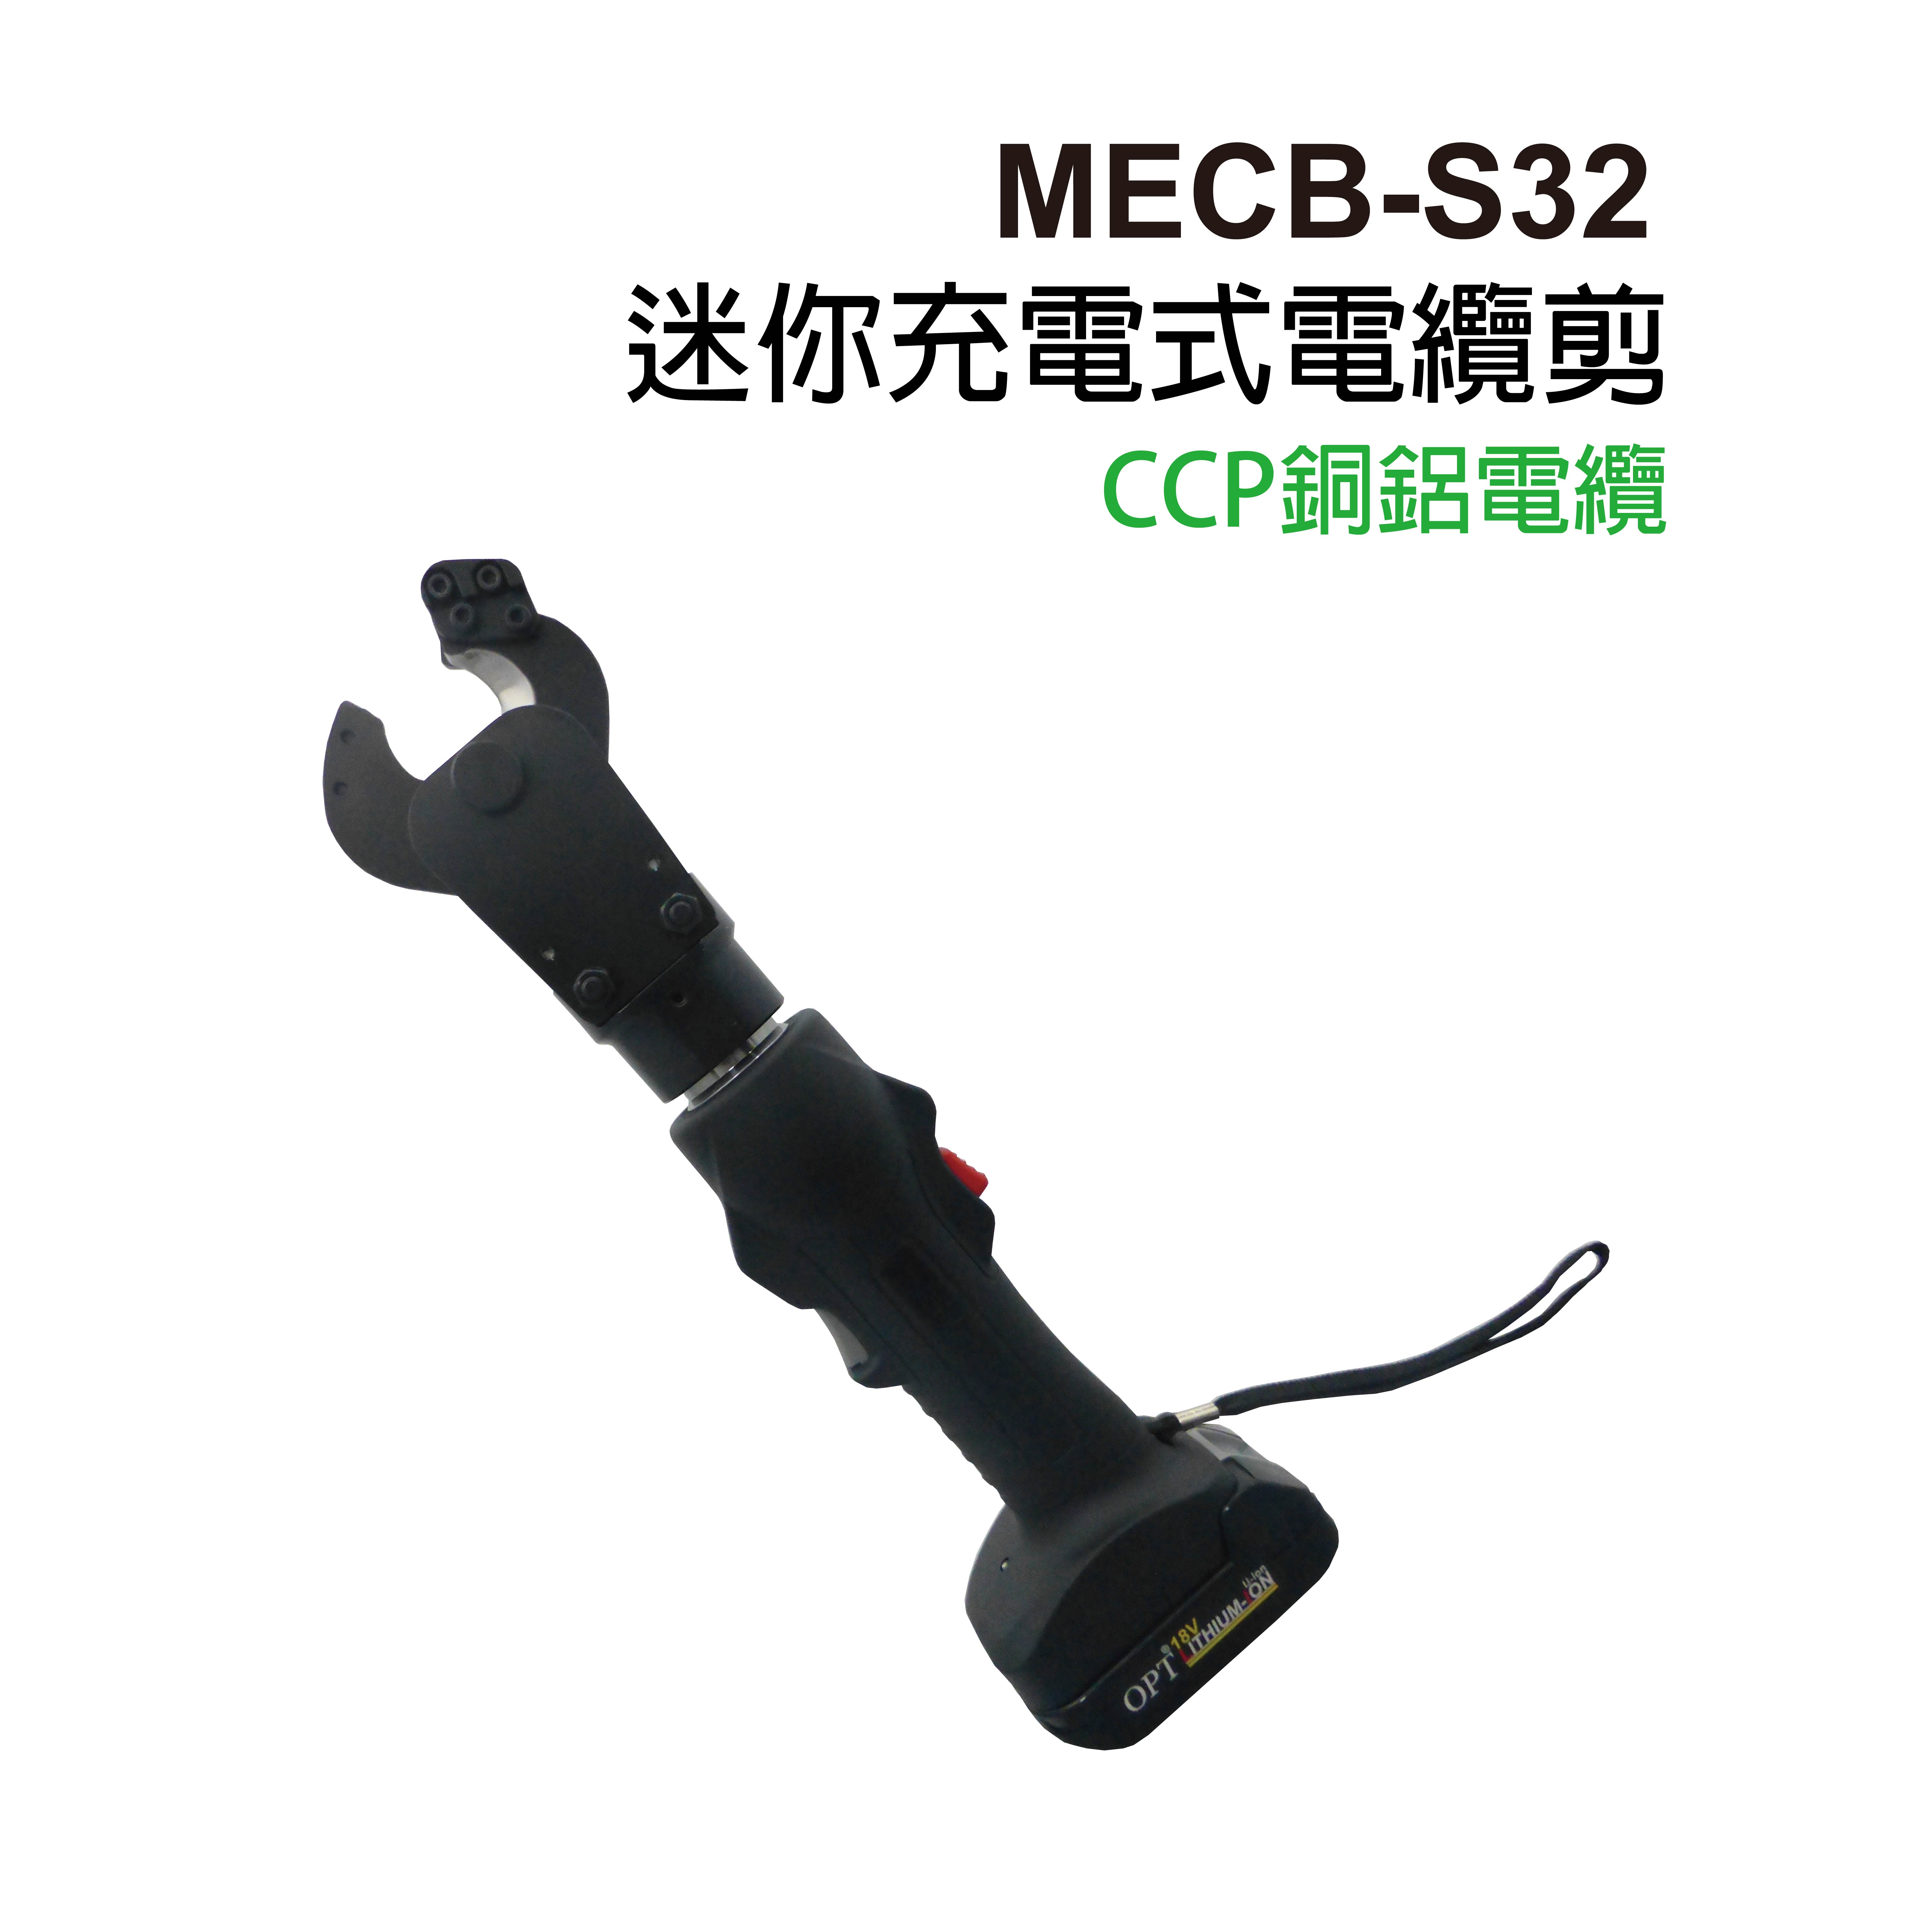 MECB-S32 CORDLESS HYDRAULIC CABLE CUTTERS